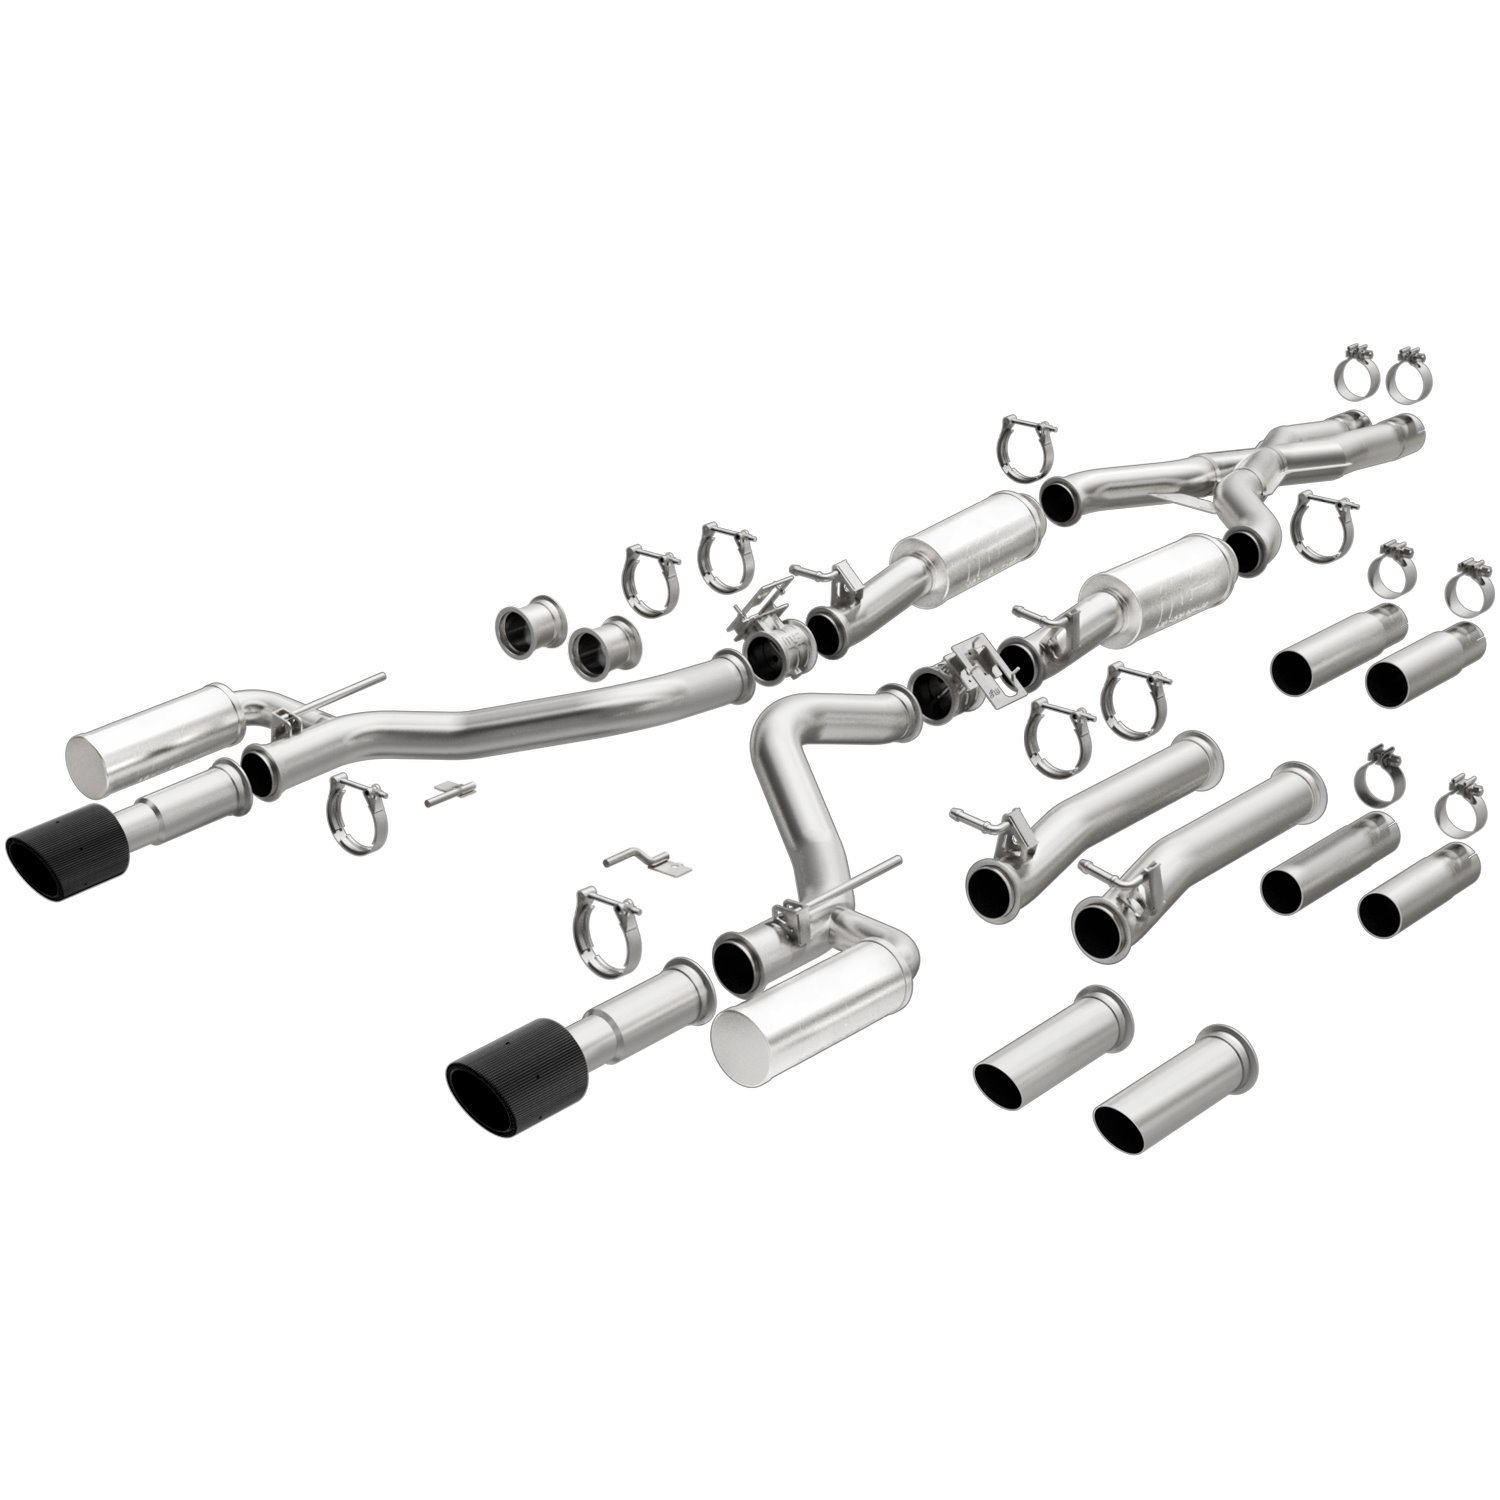 xMOD Series Cat-Back Exhaust System Fits Late-Model Chrysler